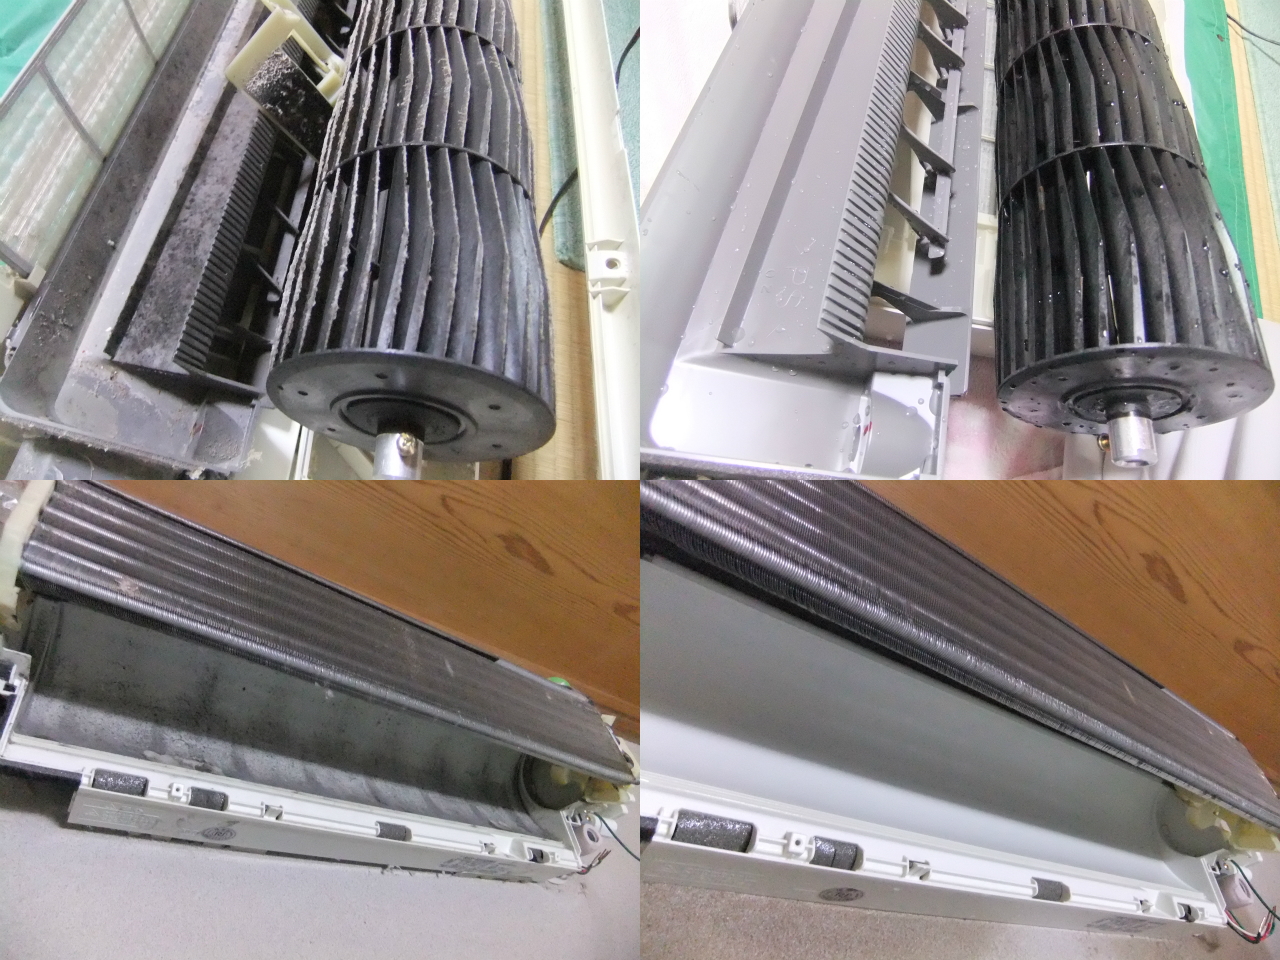 http://ajras.net/images/111013-aircon.jpg